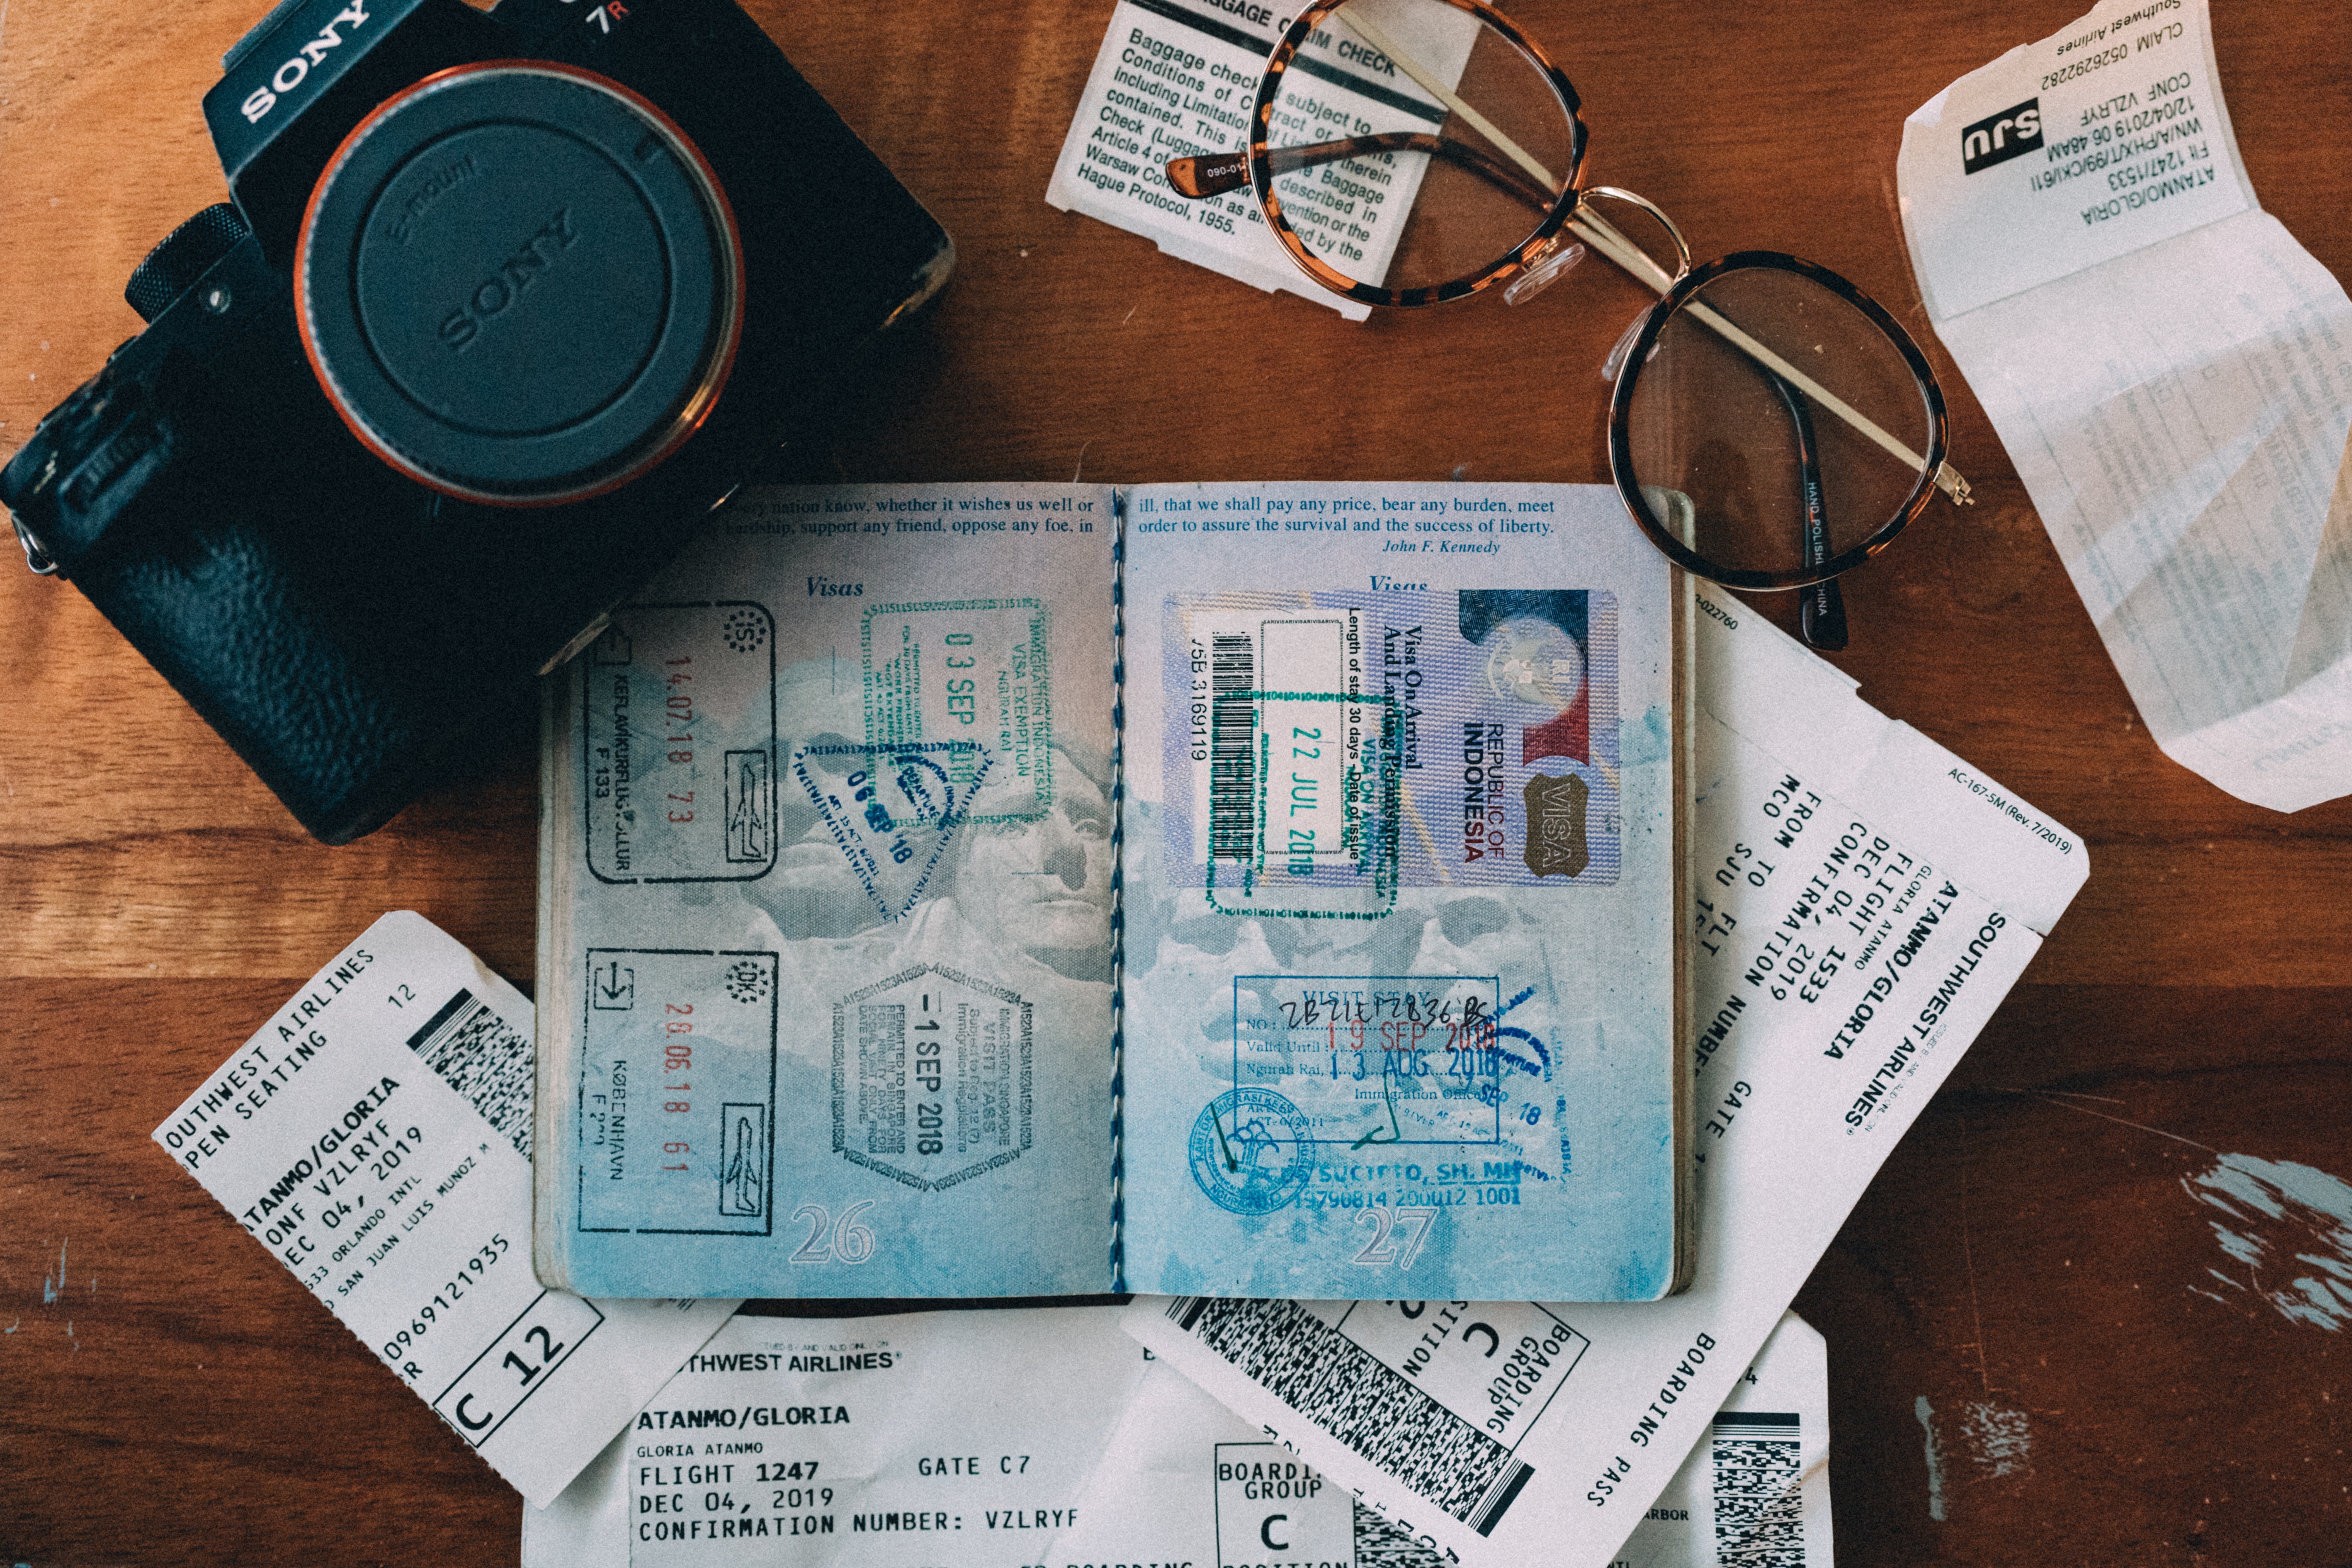 A passport with many stamps rests on a table. There is a camera, a pair of glasses and some plane tickets on the table.